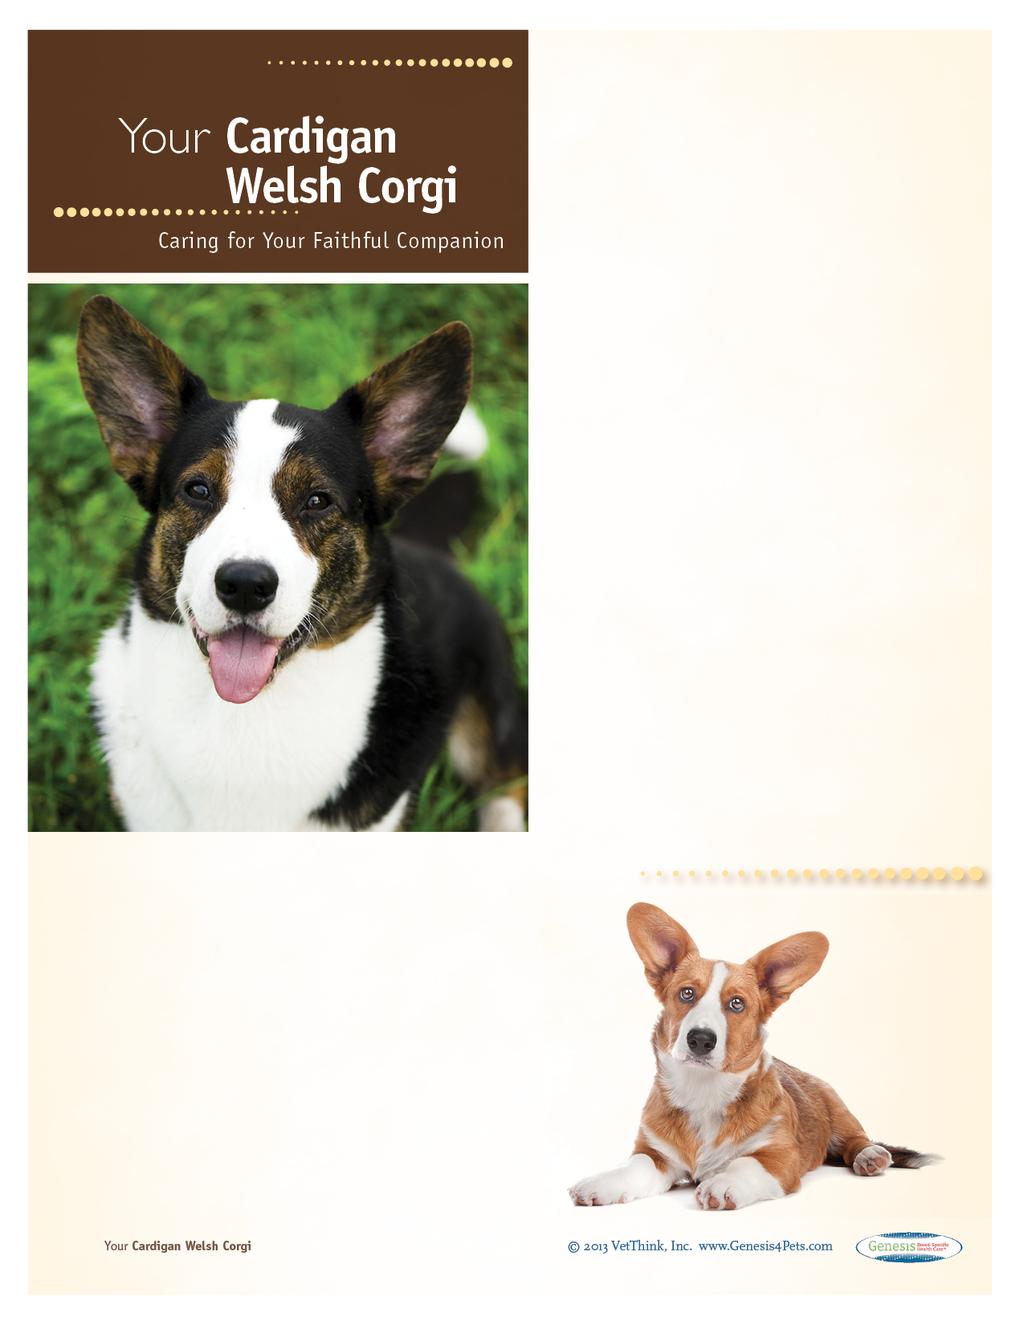 Cardigan Welsh Corgis: What a Unique Breed! Your dog is special! She's your best friend, companion, and a source of unconditional love.